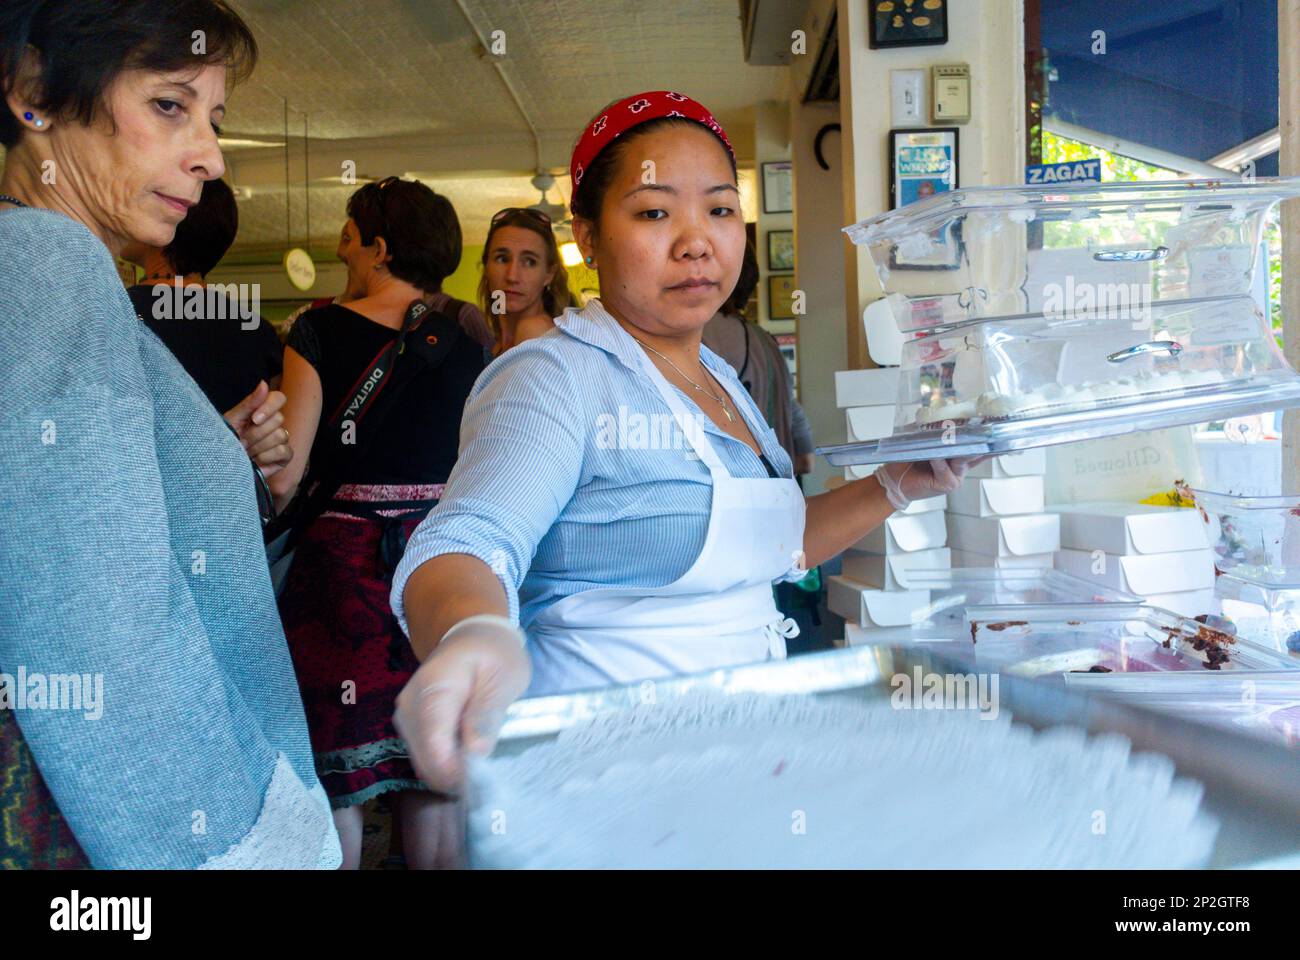 New York CIty, NY, USA, Asian WOman Clerk WOrking in American Bakery, Shop, 'Magnolia', in Greenwich Village, workplace diversity Stock Photo